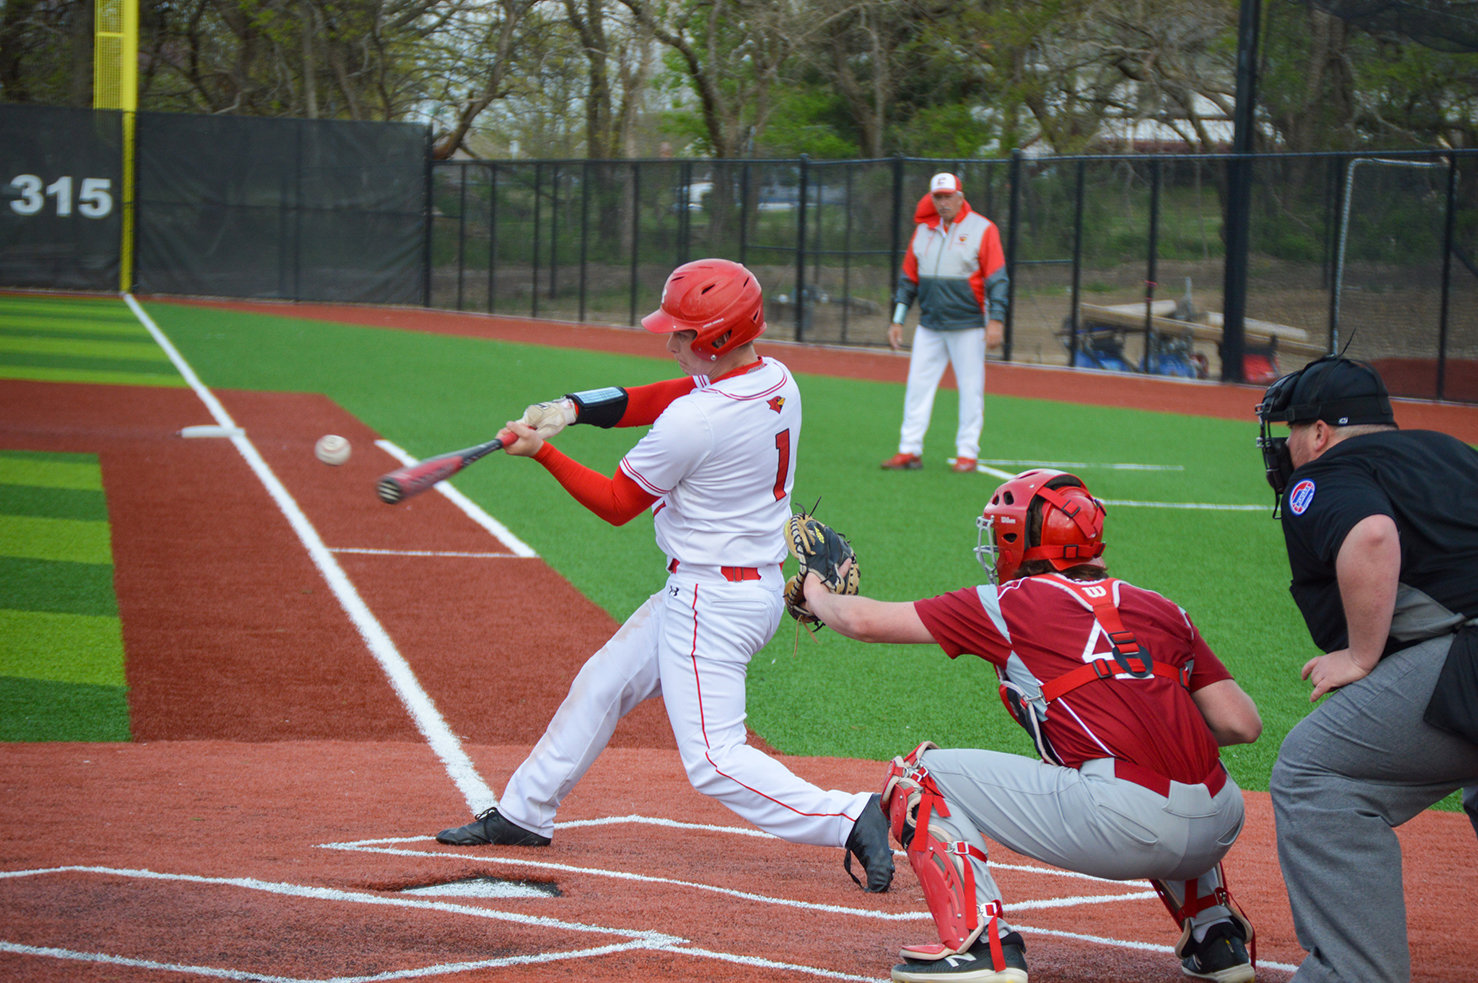 CARDINALS senior Anthony Gumminger smacked three hits to lead the Cardinals, but the Cardinals could not overcome their defensive miscues against Warrensburg on Thursday night.